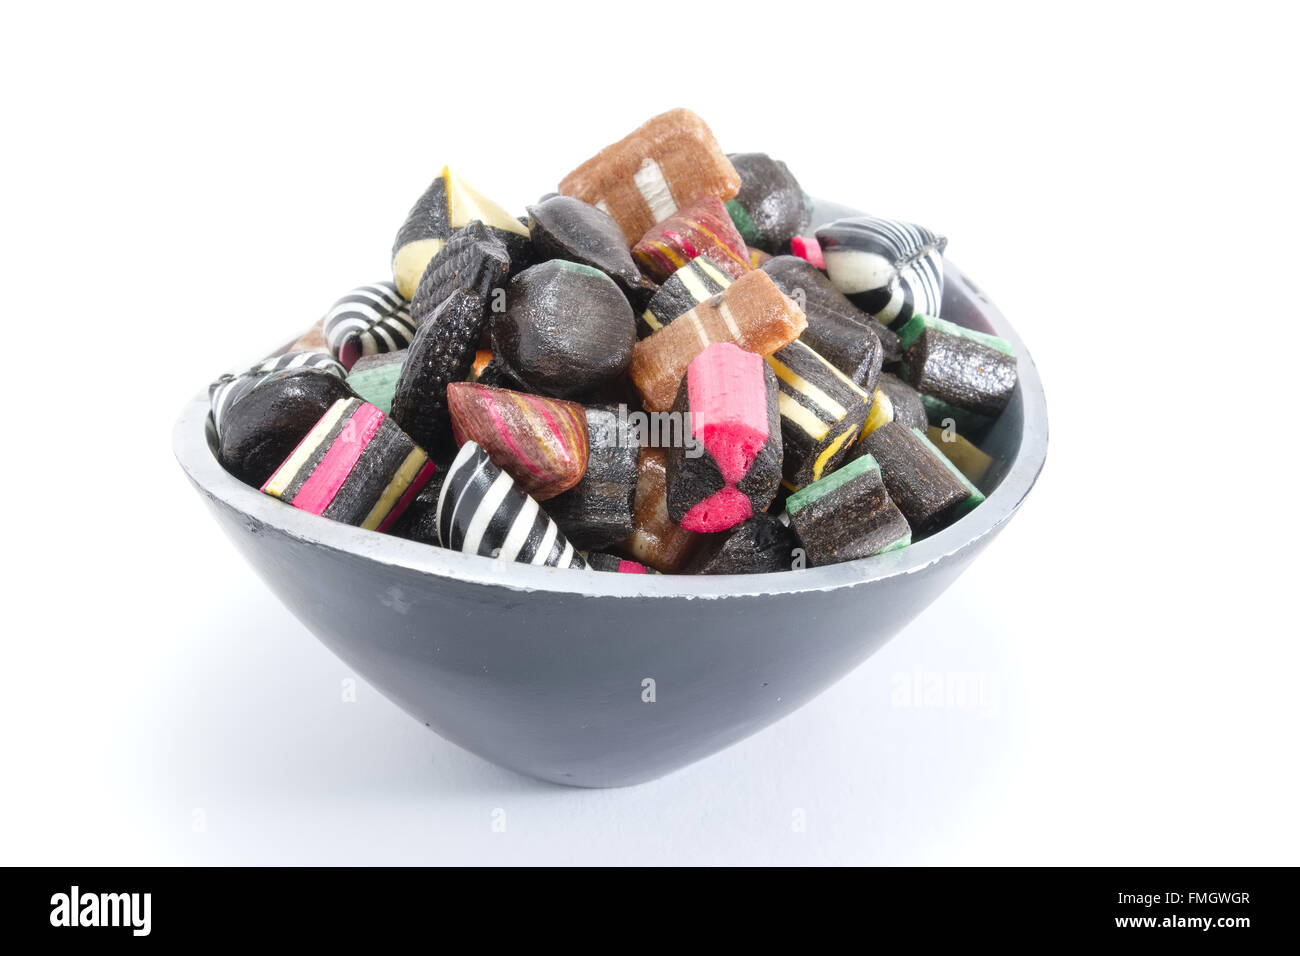 Hard candy in a bowl on a white surface Stock Photo